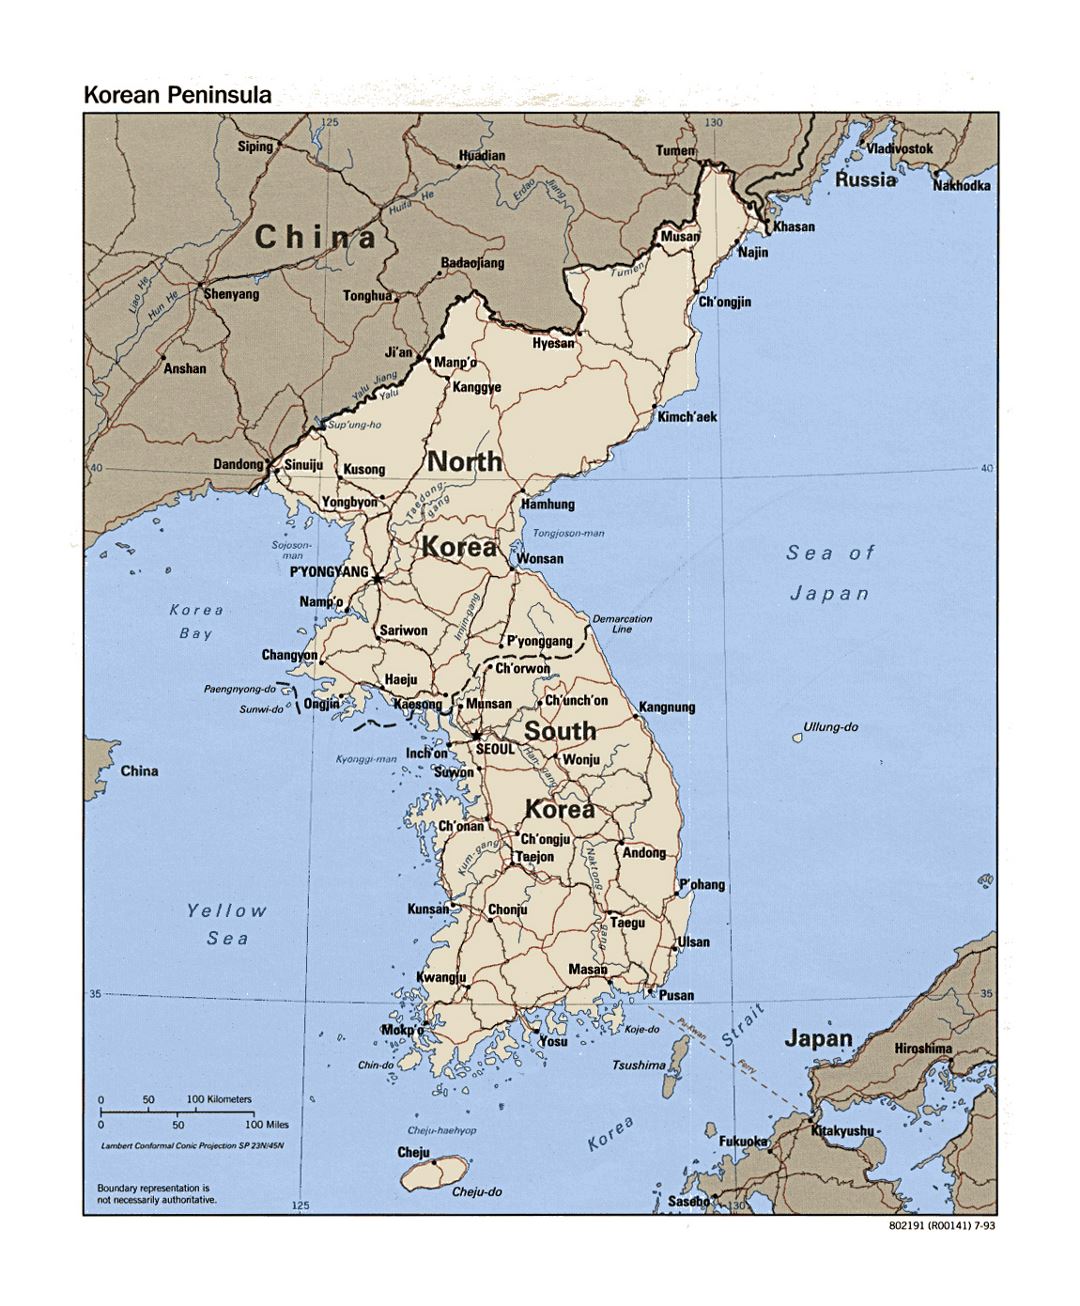 Detailed political map of Korean Peninsula with roads, railroads and major cities - 1993